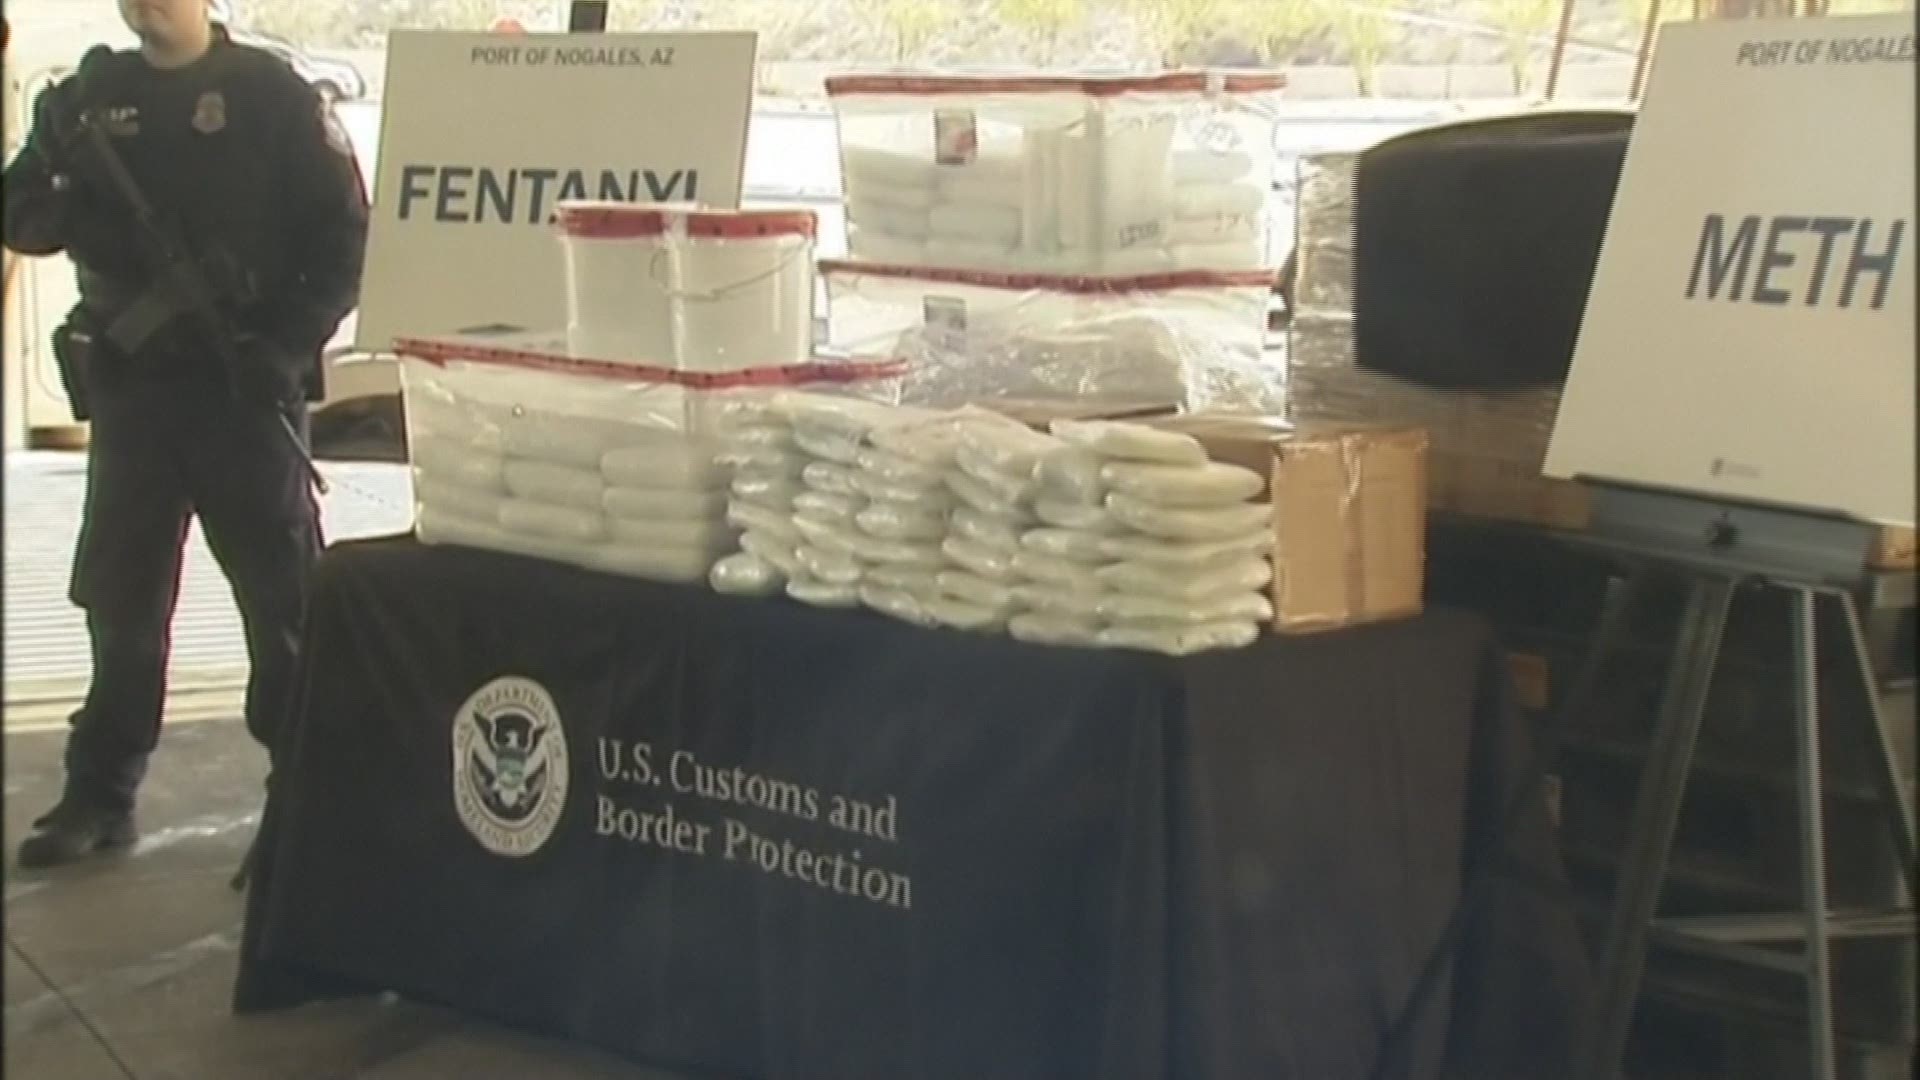 Customs and Border Protection reports its largest fentanyl bust ever, seizing 254 pounds of the opioid in Arizona at the southern border.